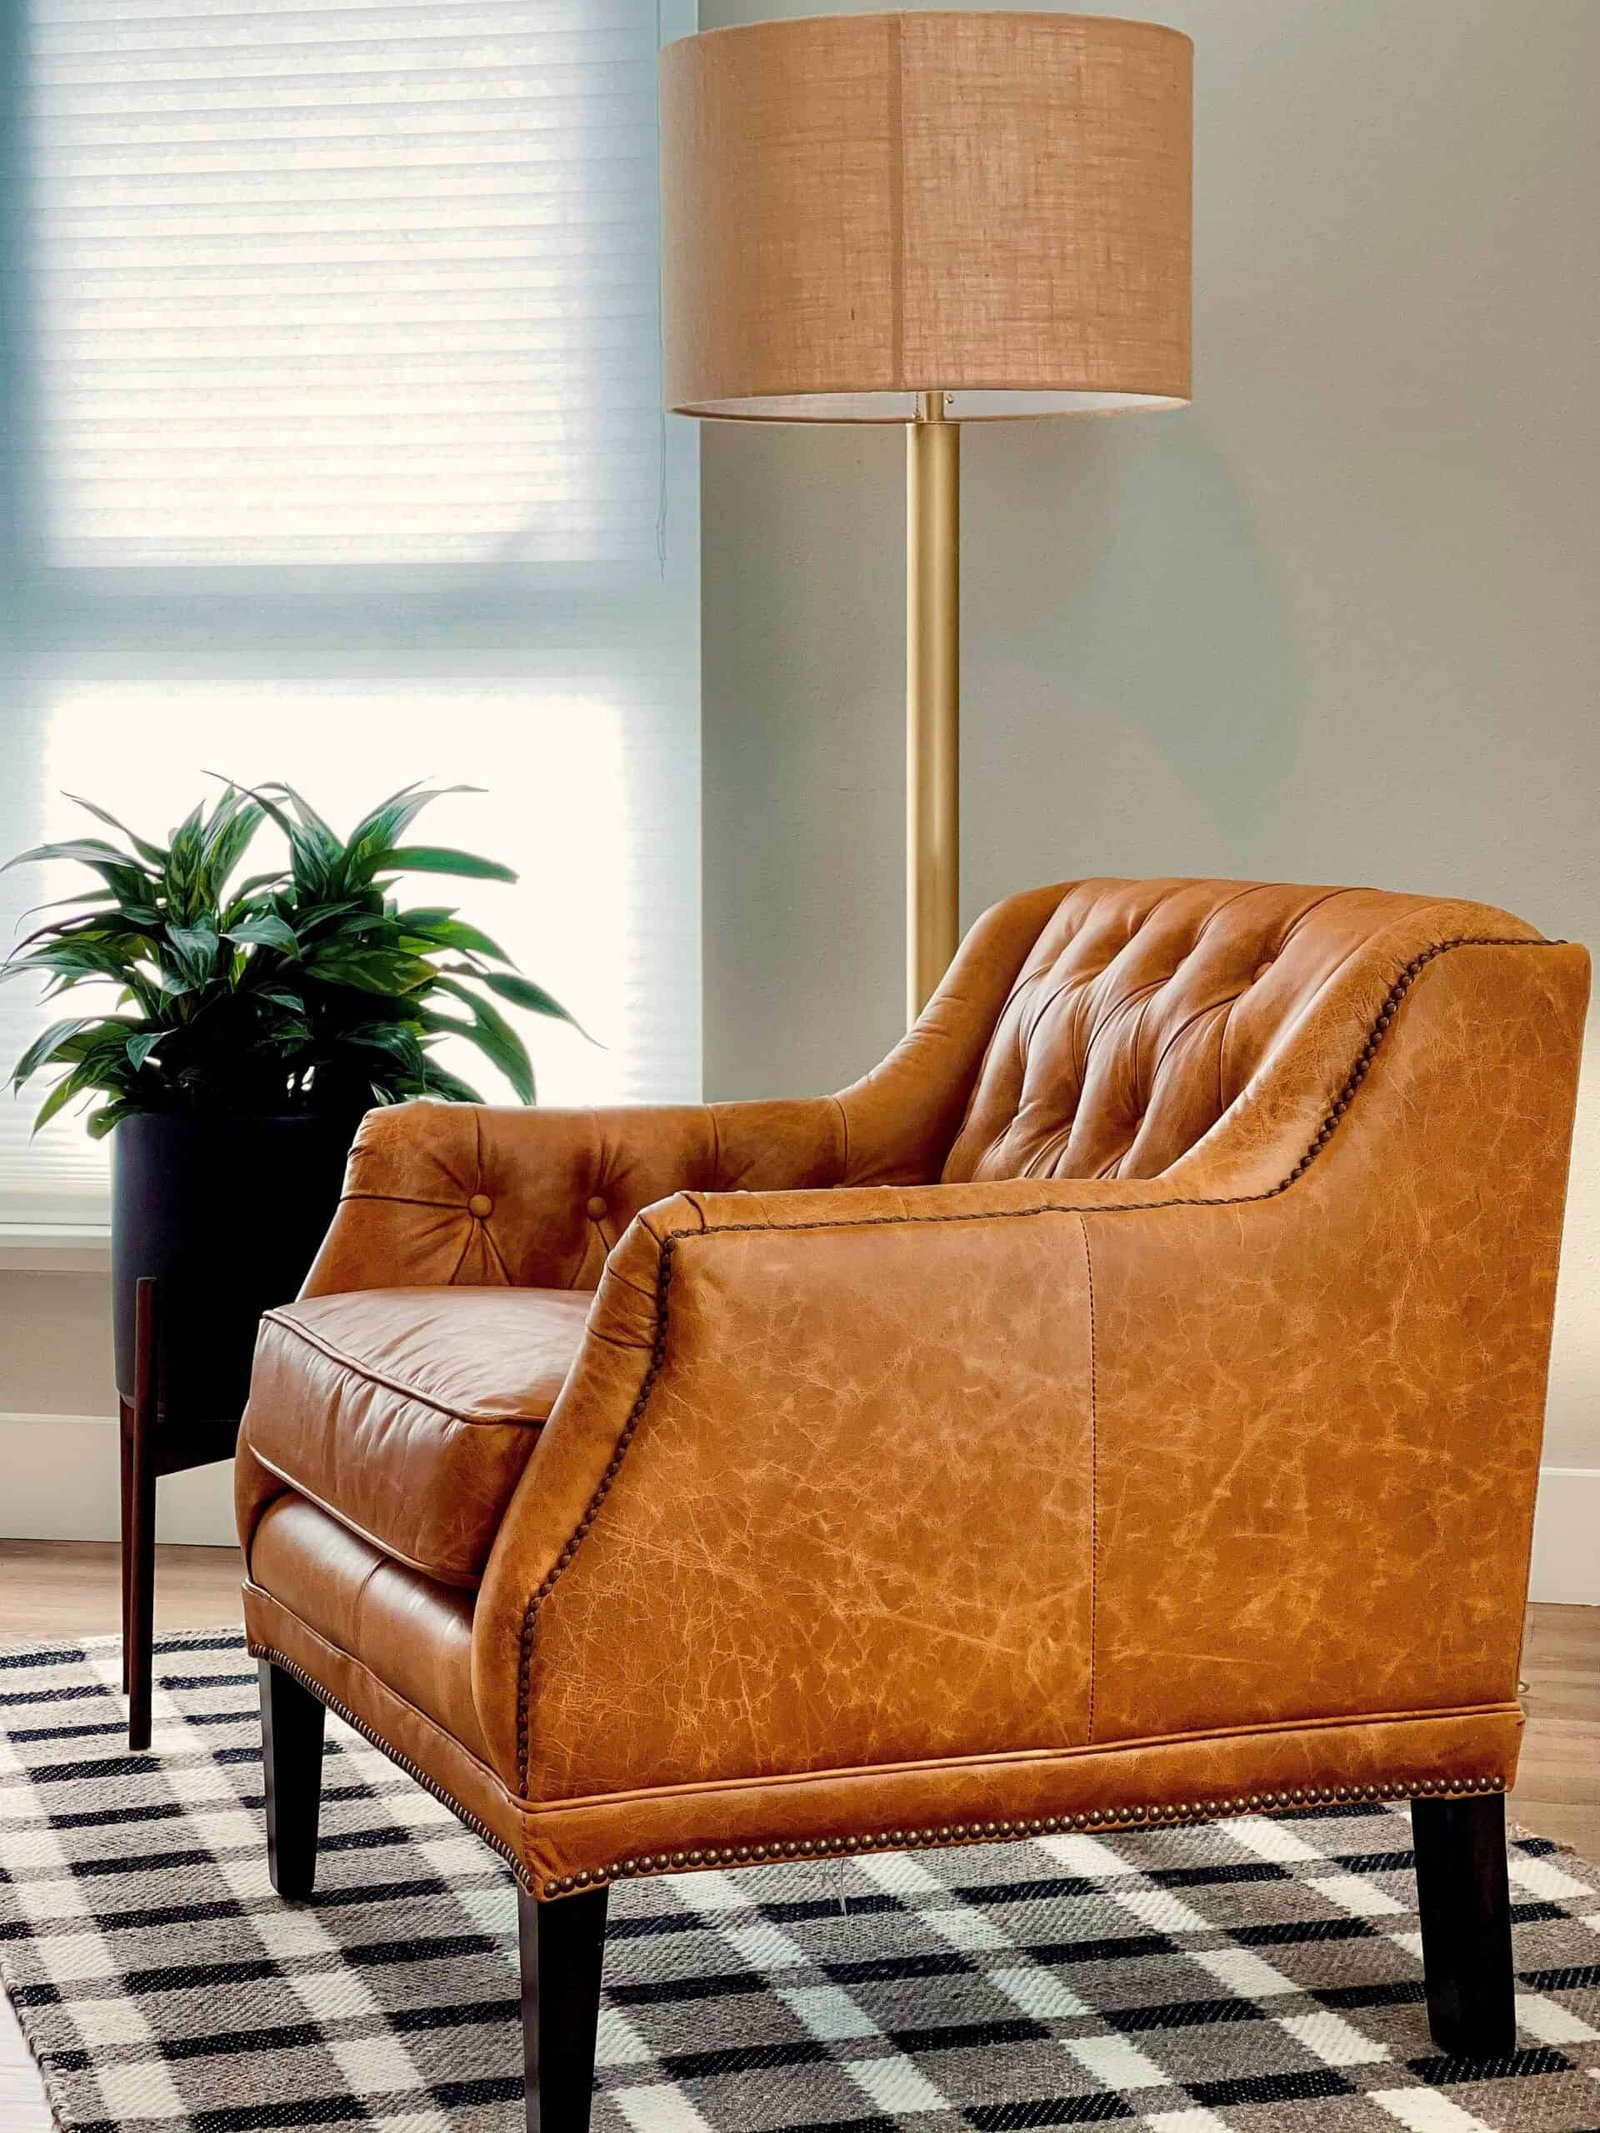 How to Buy the Best Recliner Chair